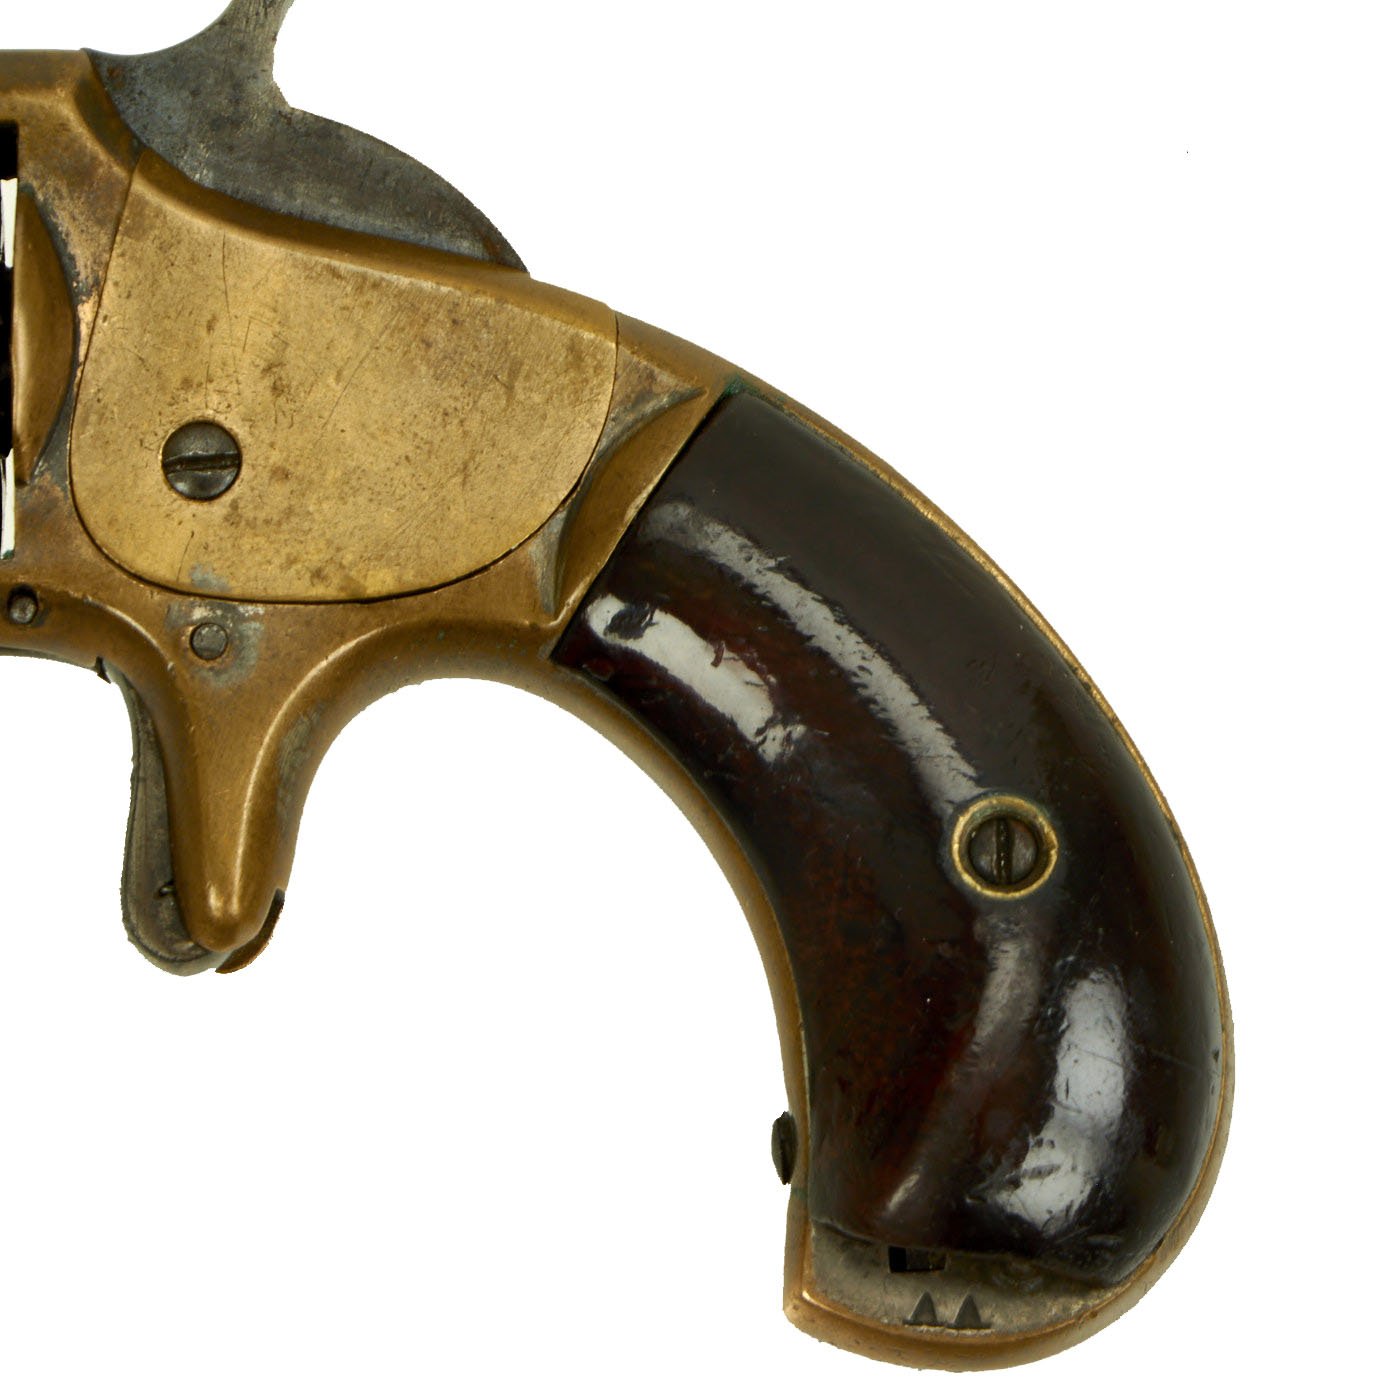 Brass ring with bullets and gun serial number